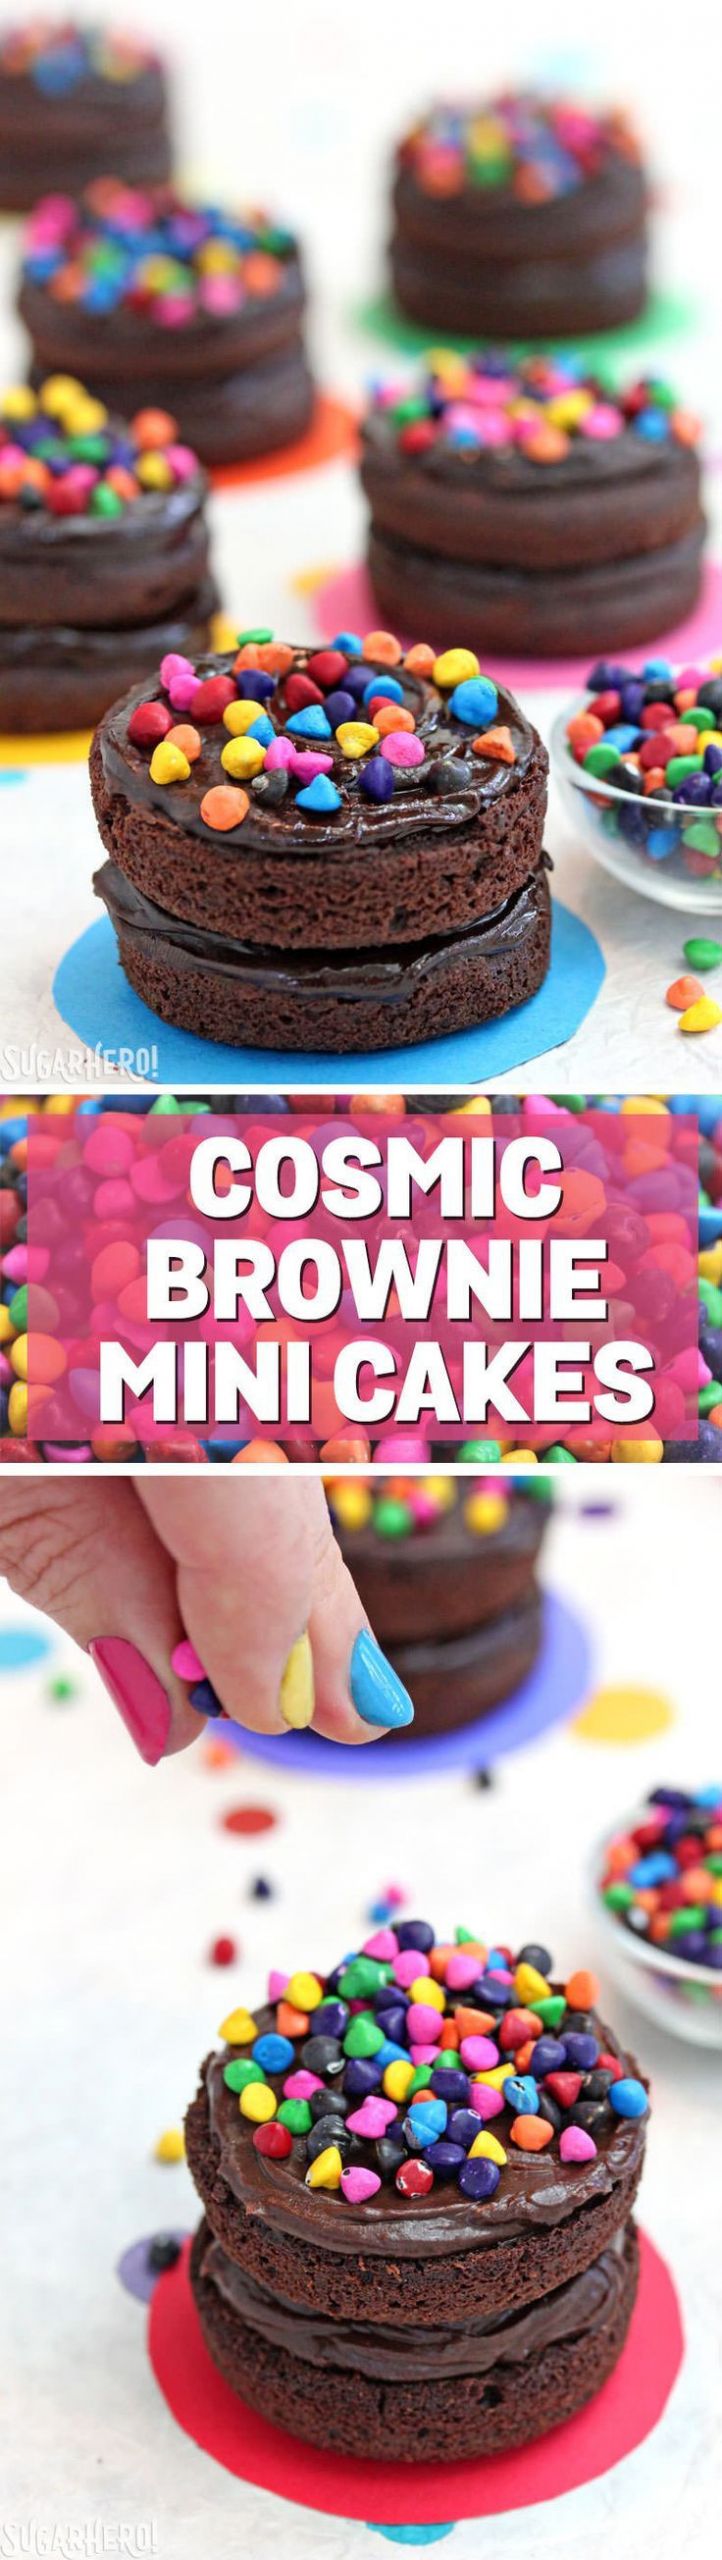 Mini Birthday Cake Recipes
 Cosmic Brownie Mini Cakes cute little brownie cakes with